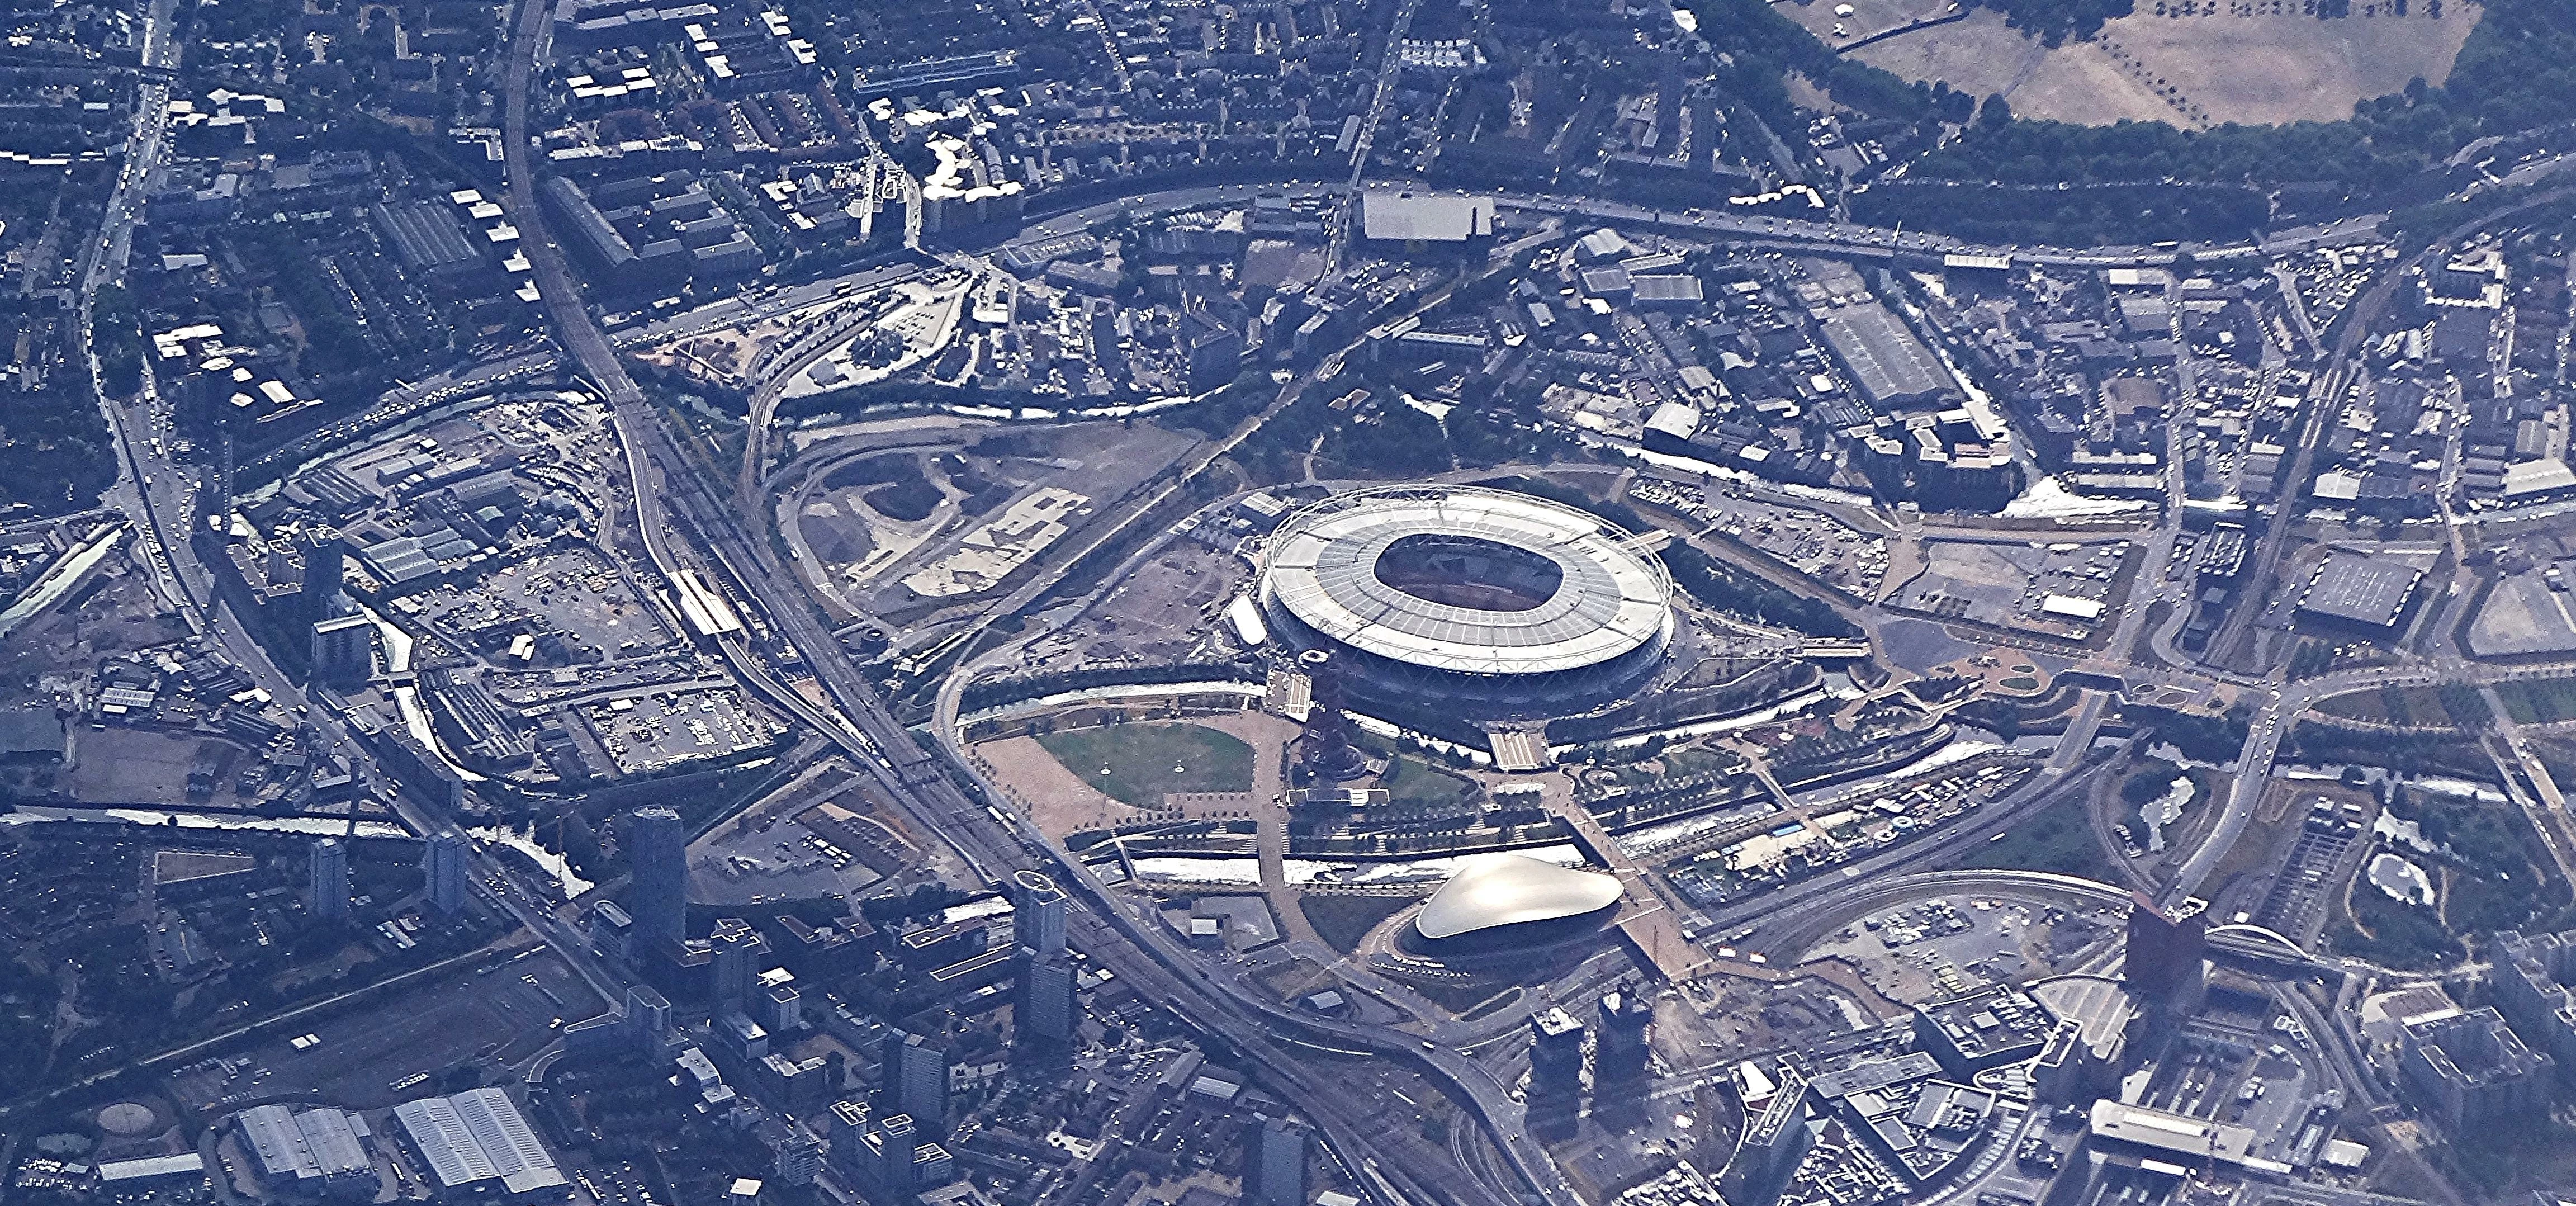 The Olympic Stadium, aquatics centre and Westfield Stratford, east London